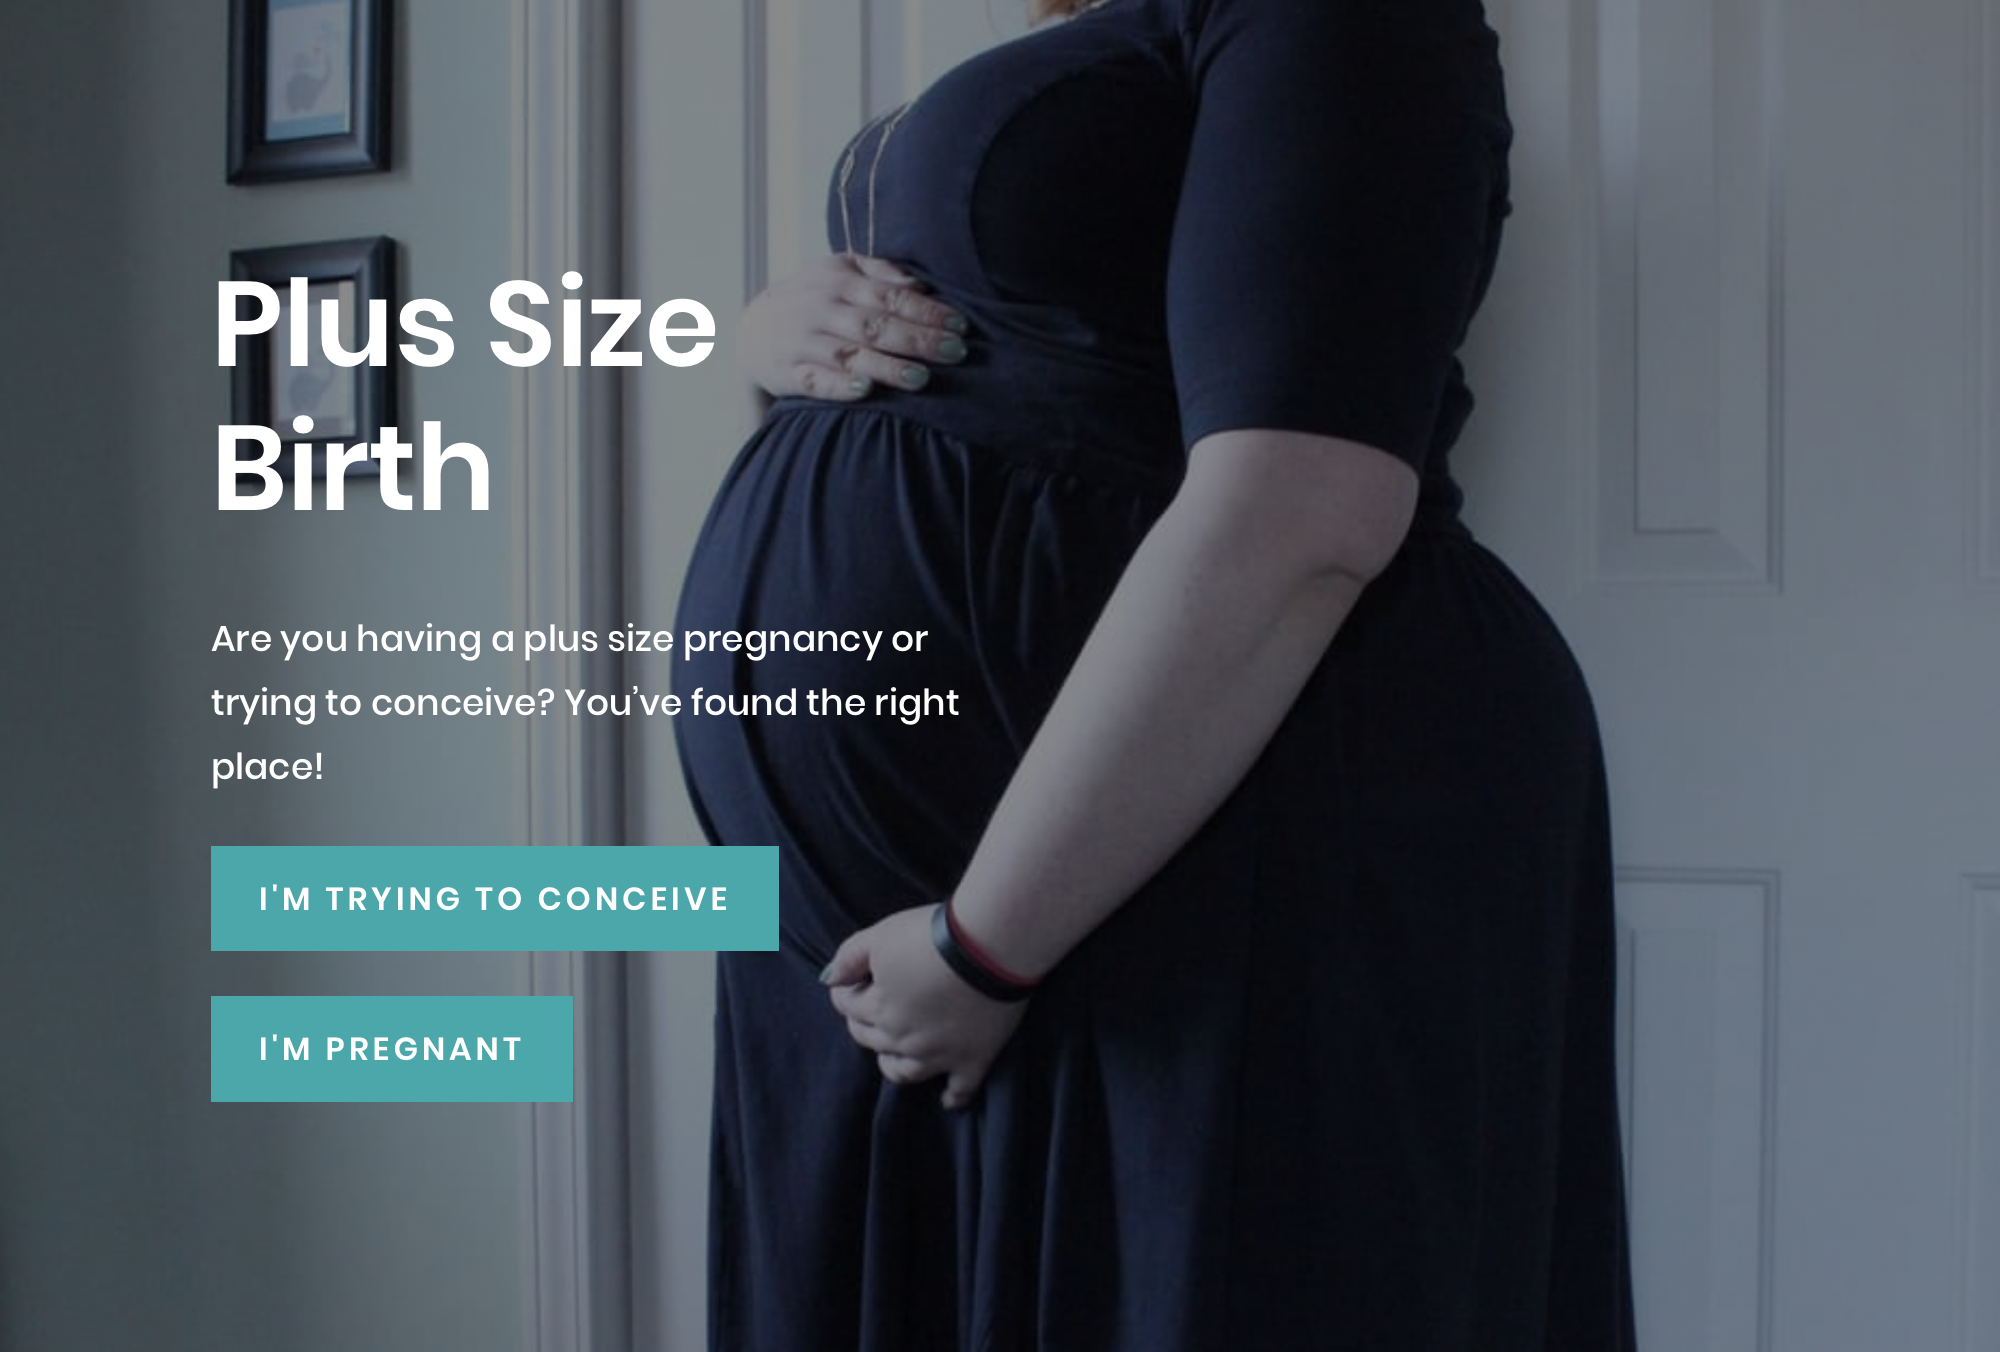 Screen shot of the Plus Size Birth website. A pregnant woman holding her abdomen. Plus Size Birth. Are you having a plus size pregnancy or trying to conceive? You’ve found the right place! Includes links that read, &quot;I'm trying to conceive&quot; and &quot;I'm pregnant.&quot;